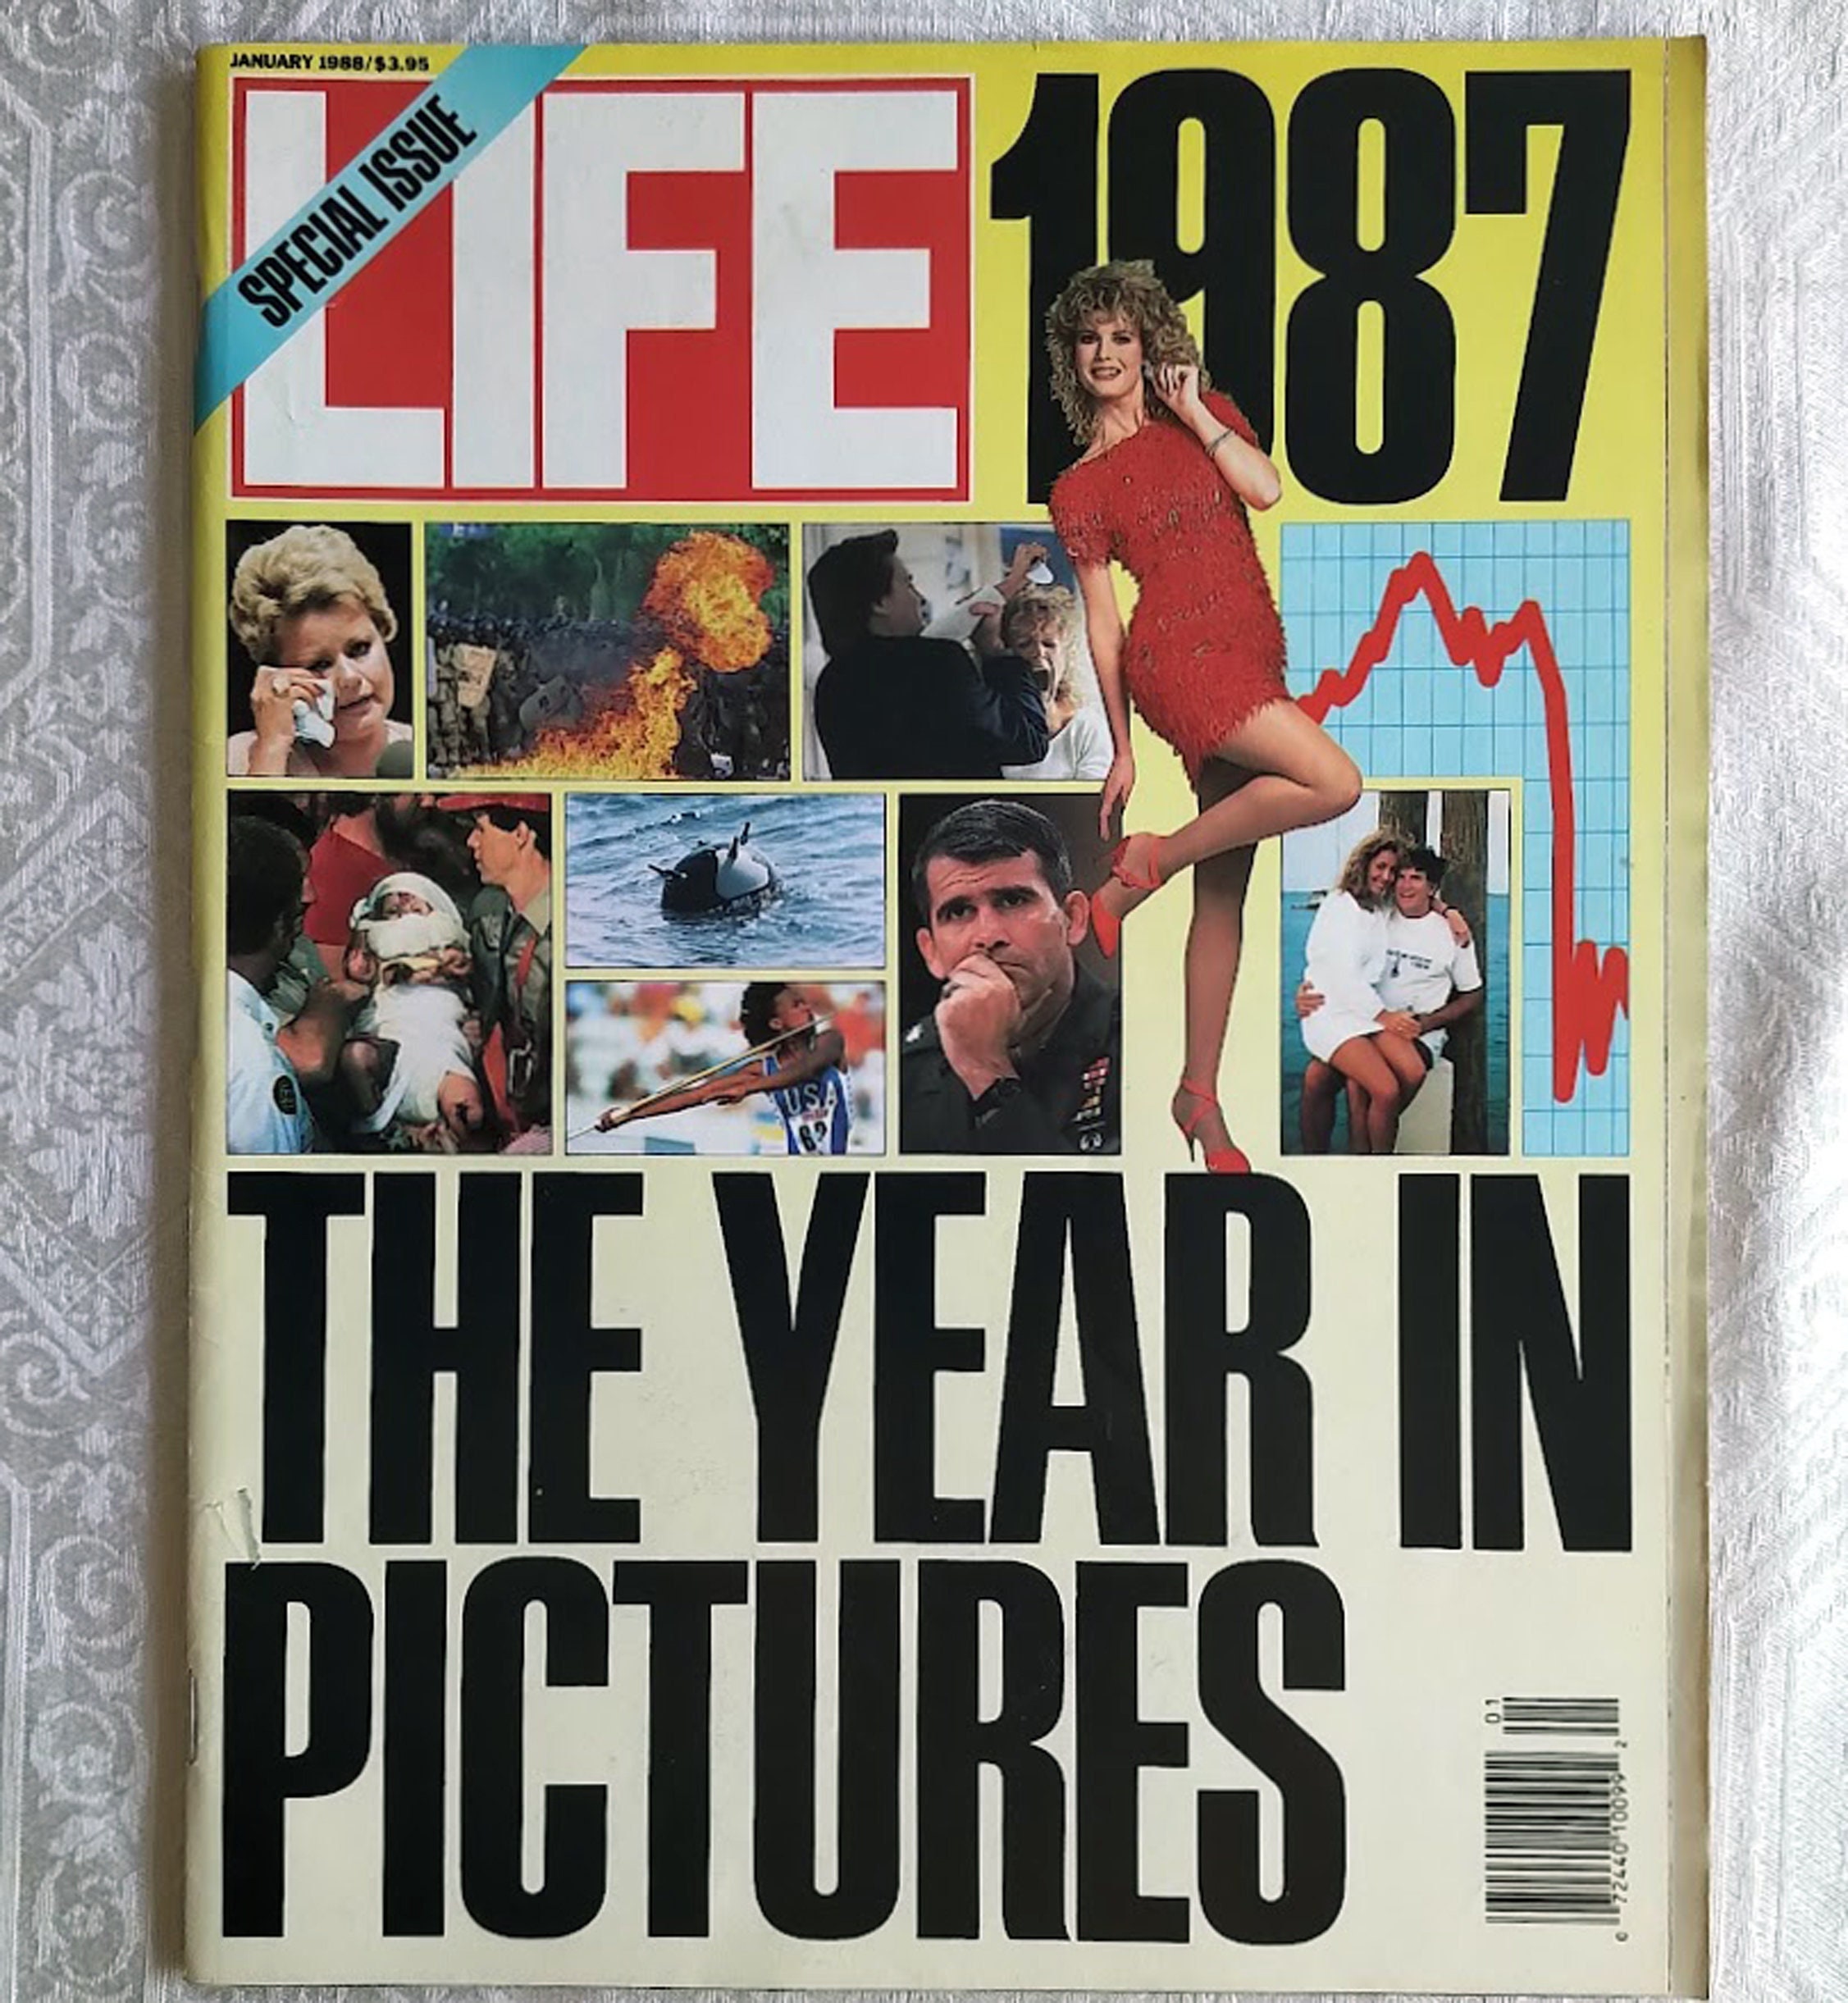 LIFE Magazine January 1988 Special Issue 1987 the Year in